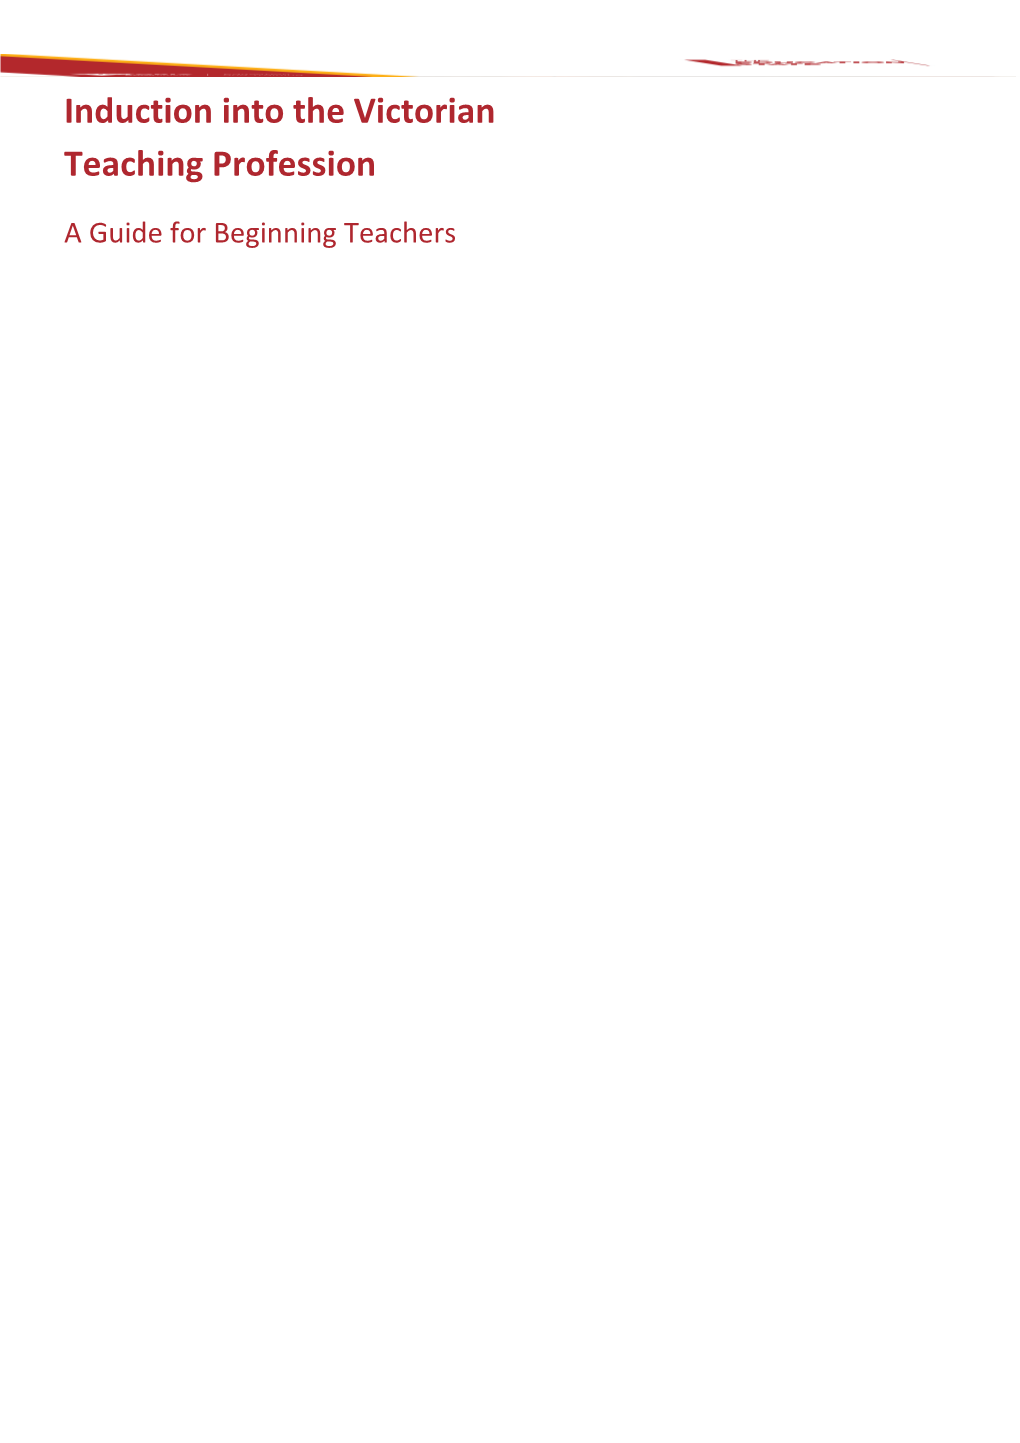 Guide for Begining Teacher 2016 Web Content Refresh